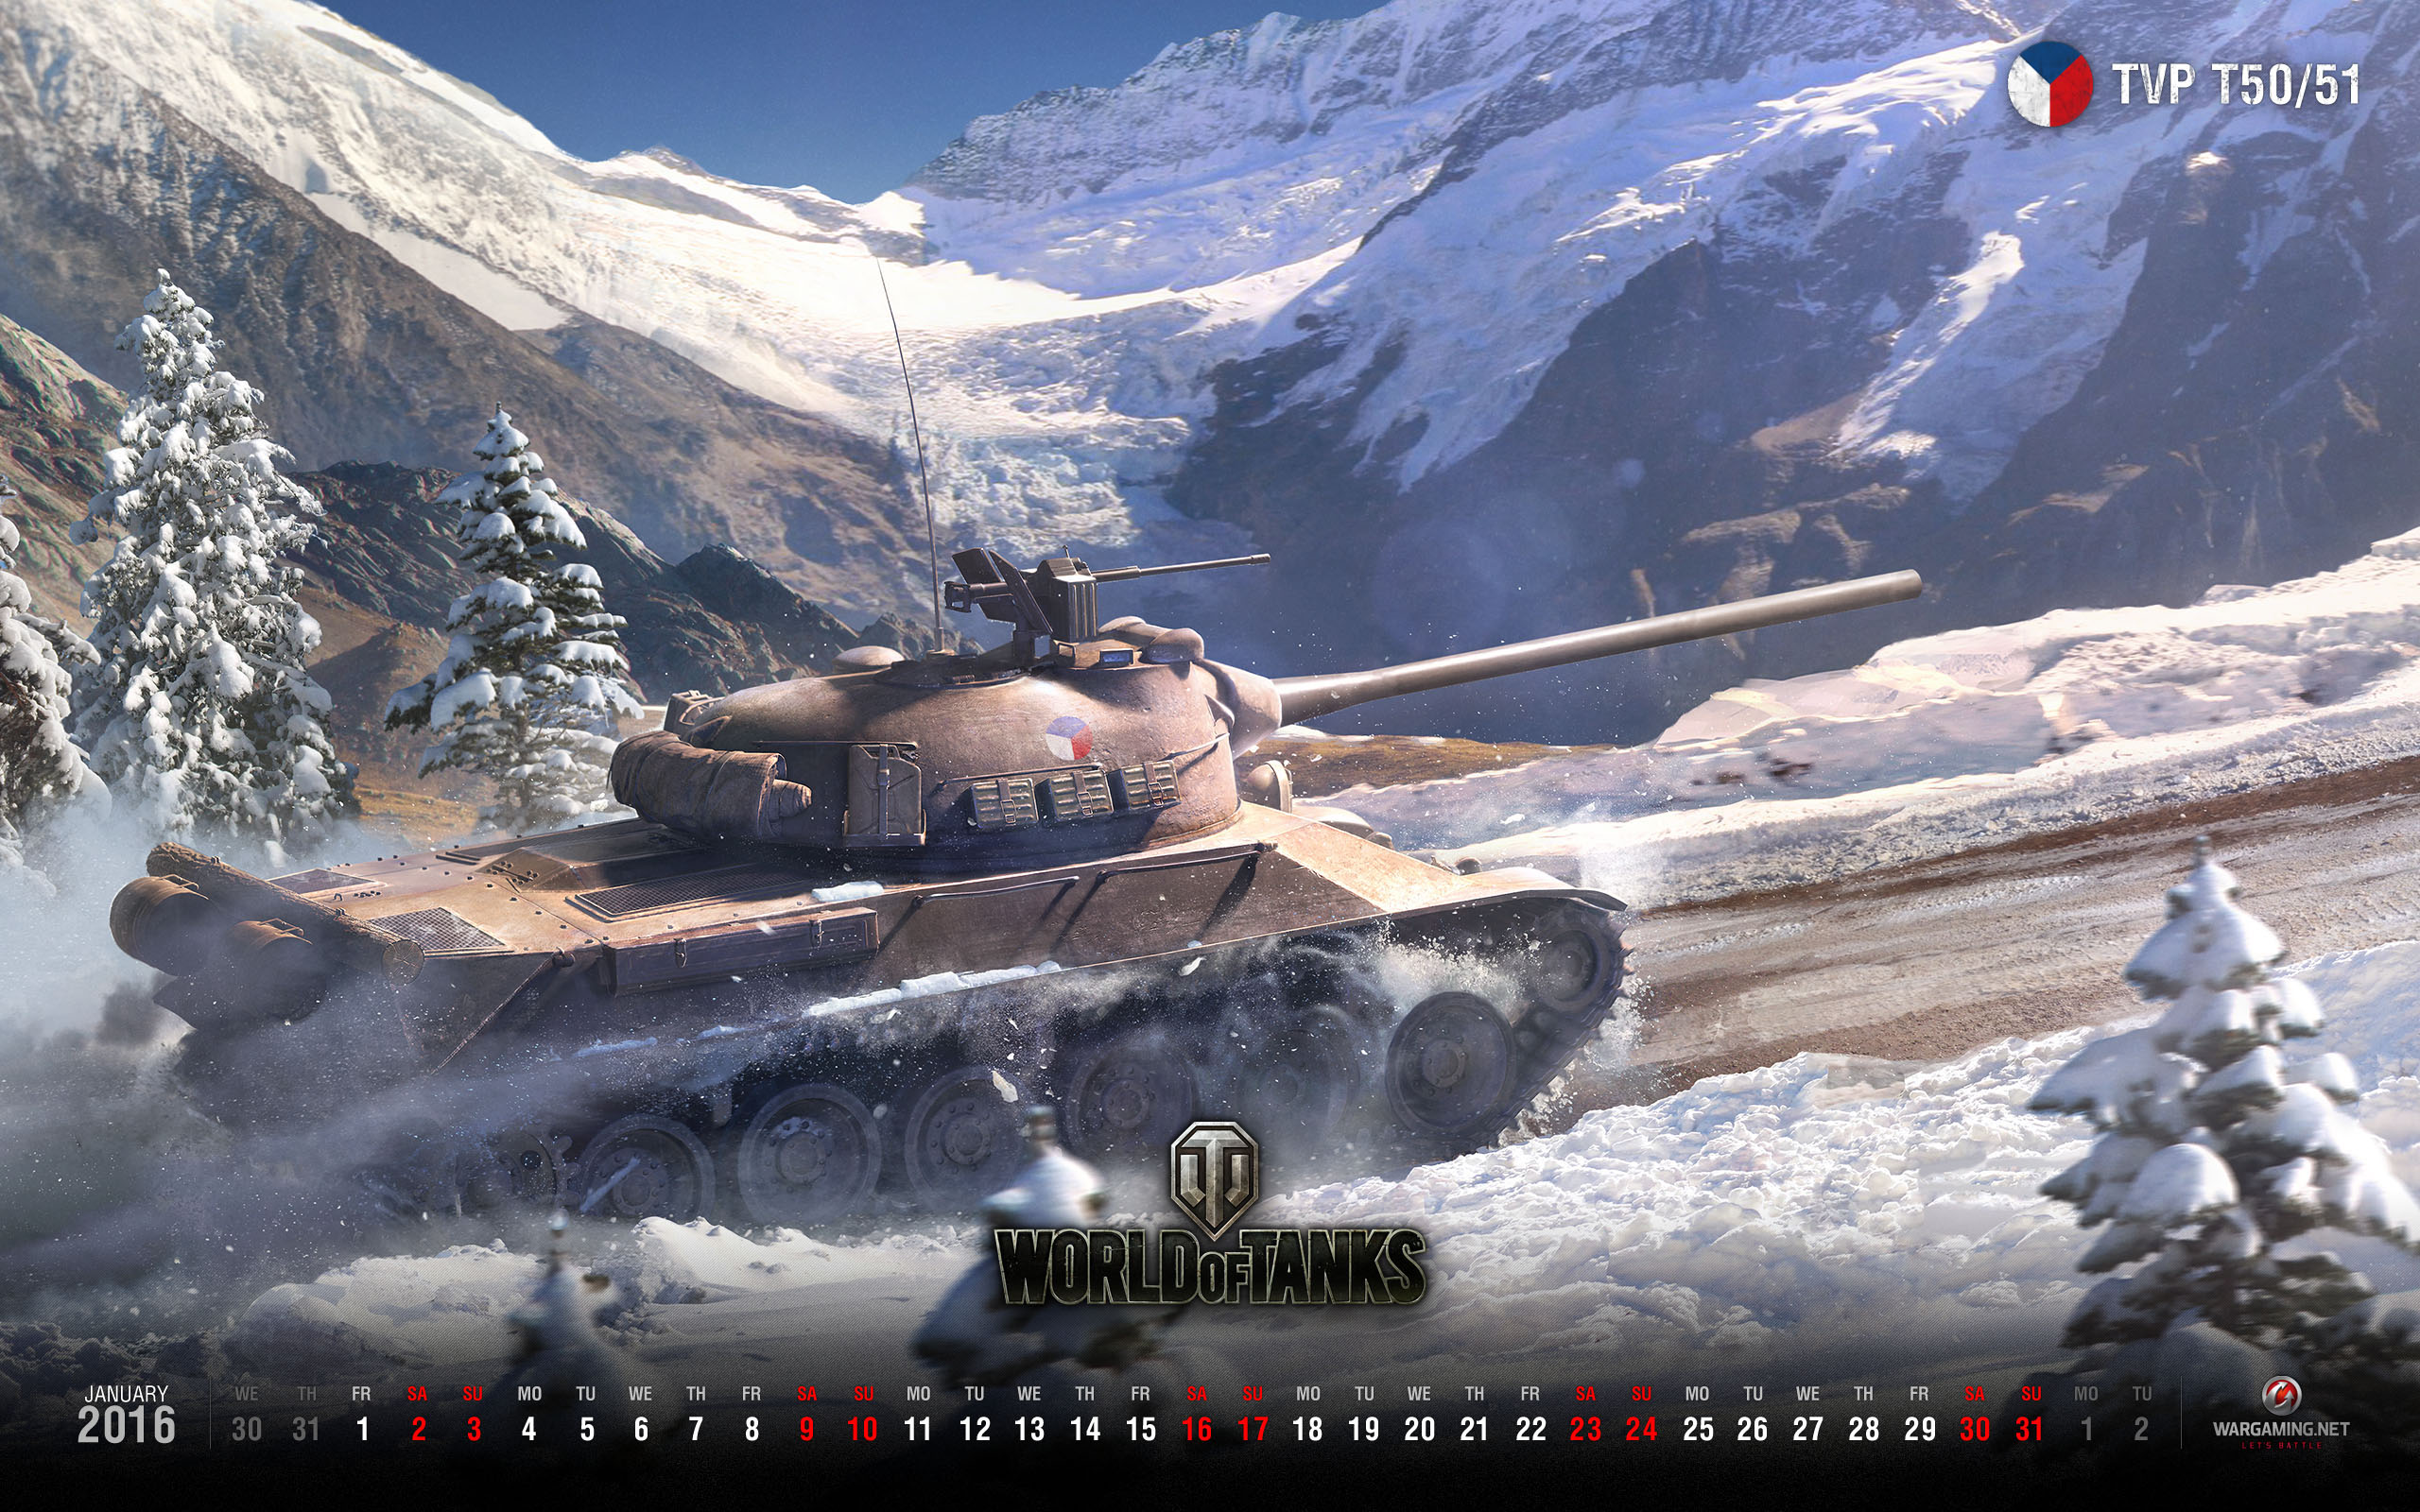 January 16 Wot Wallpaper The Armored Patrol